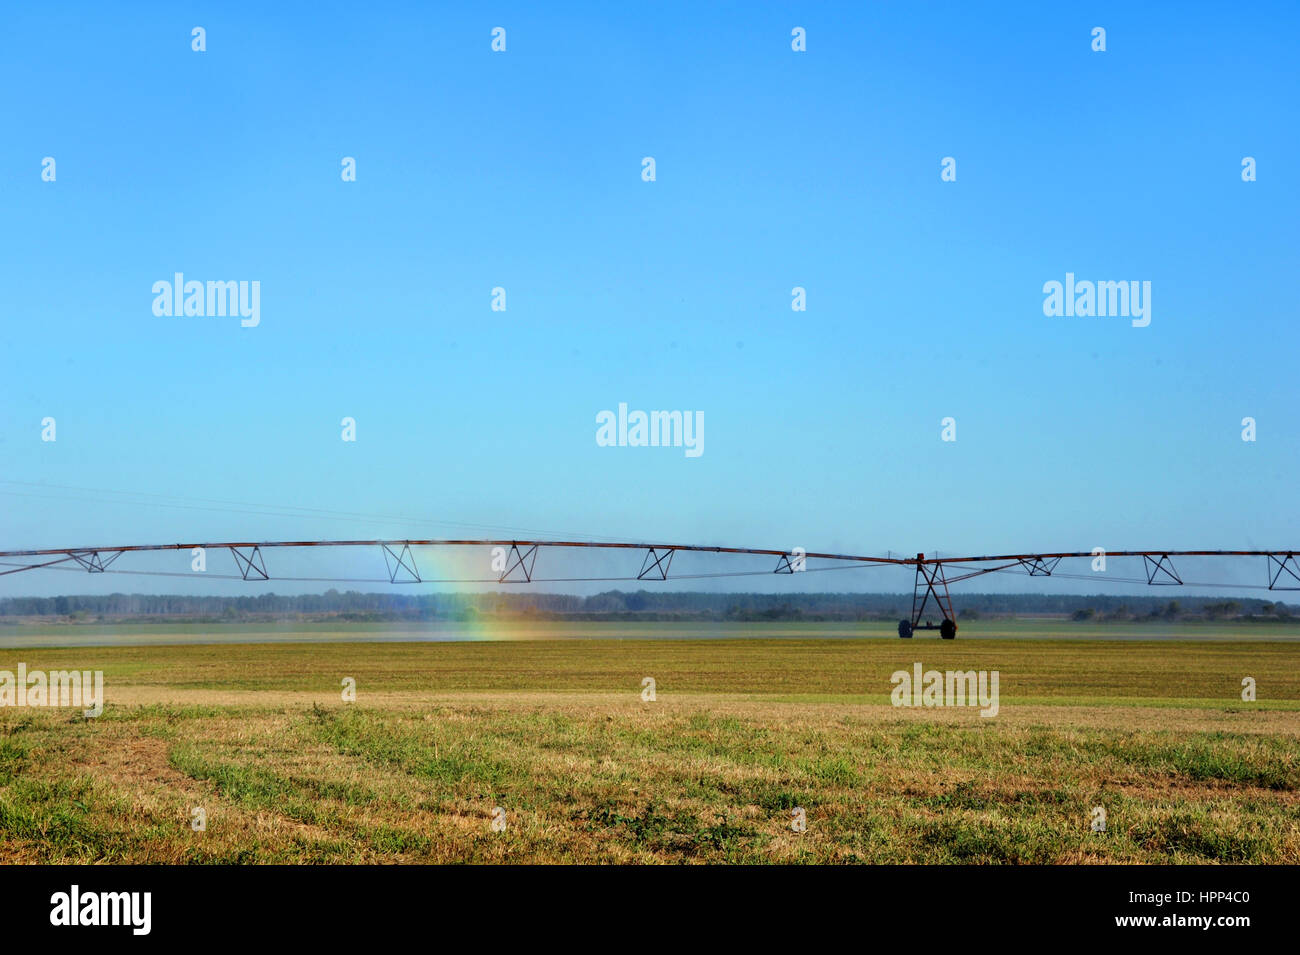 Agriculture irrigation equipment produces spray rainbow.  Field is in Southern Arkansas.  Image could represent the hope for the future of agriculture Stock Photo